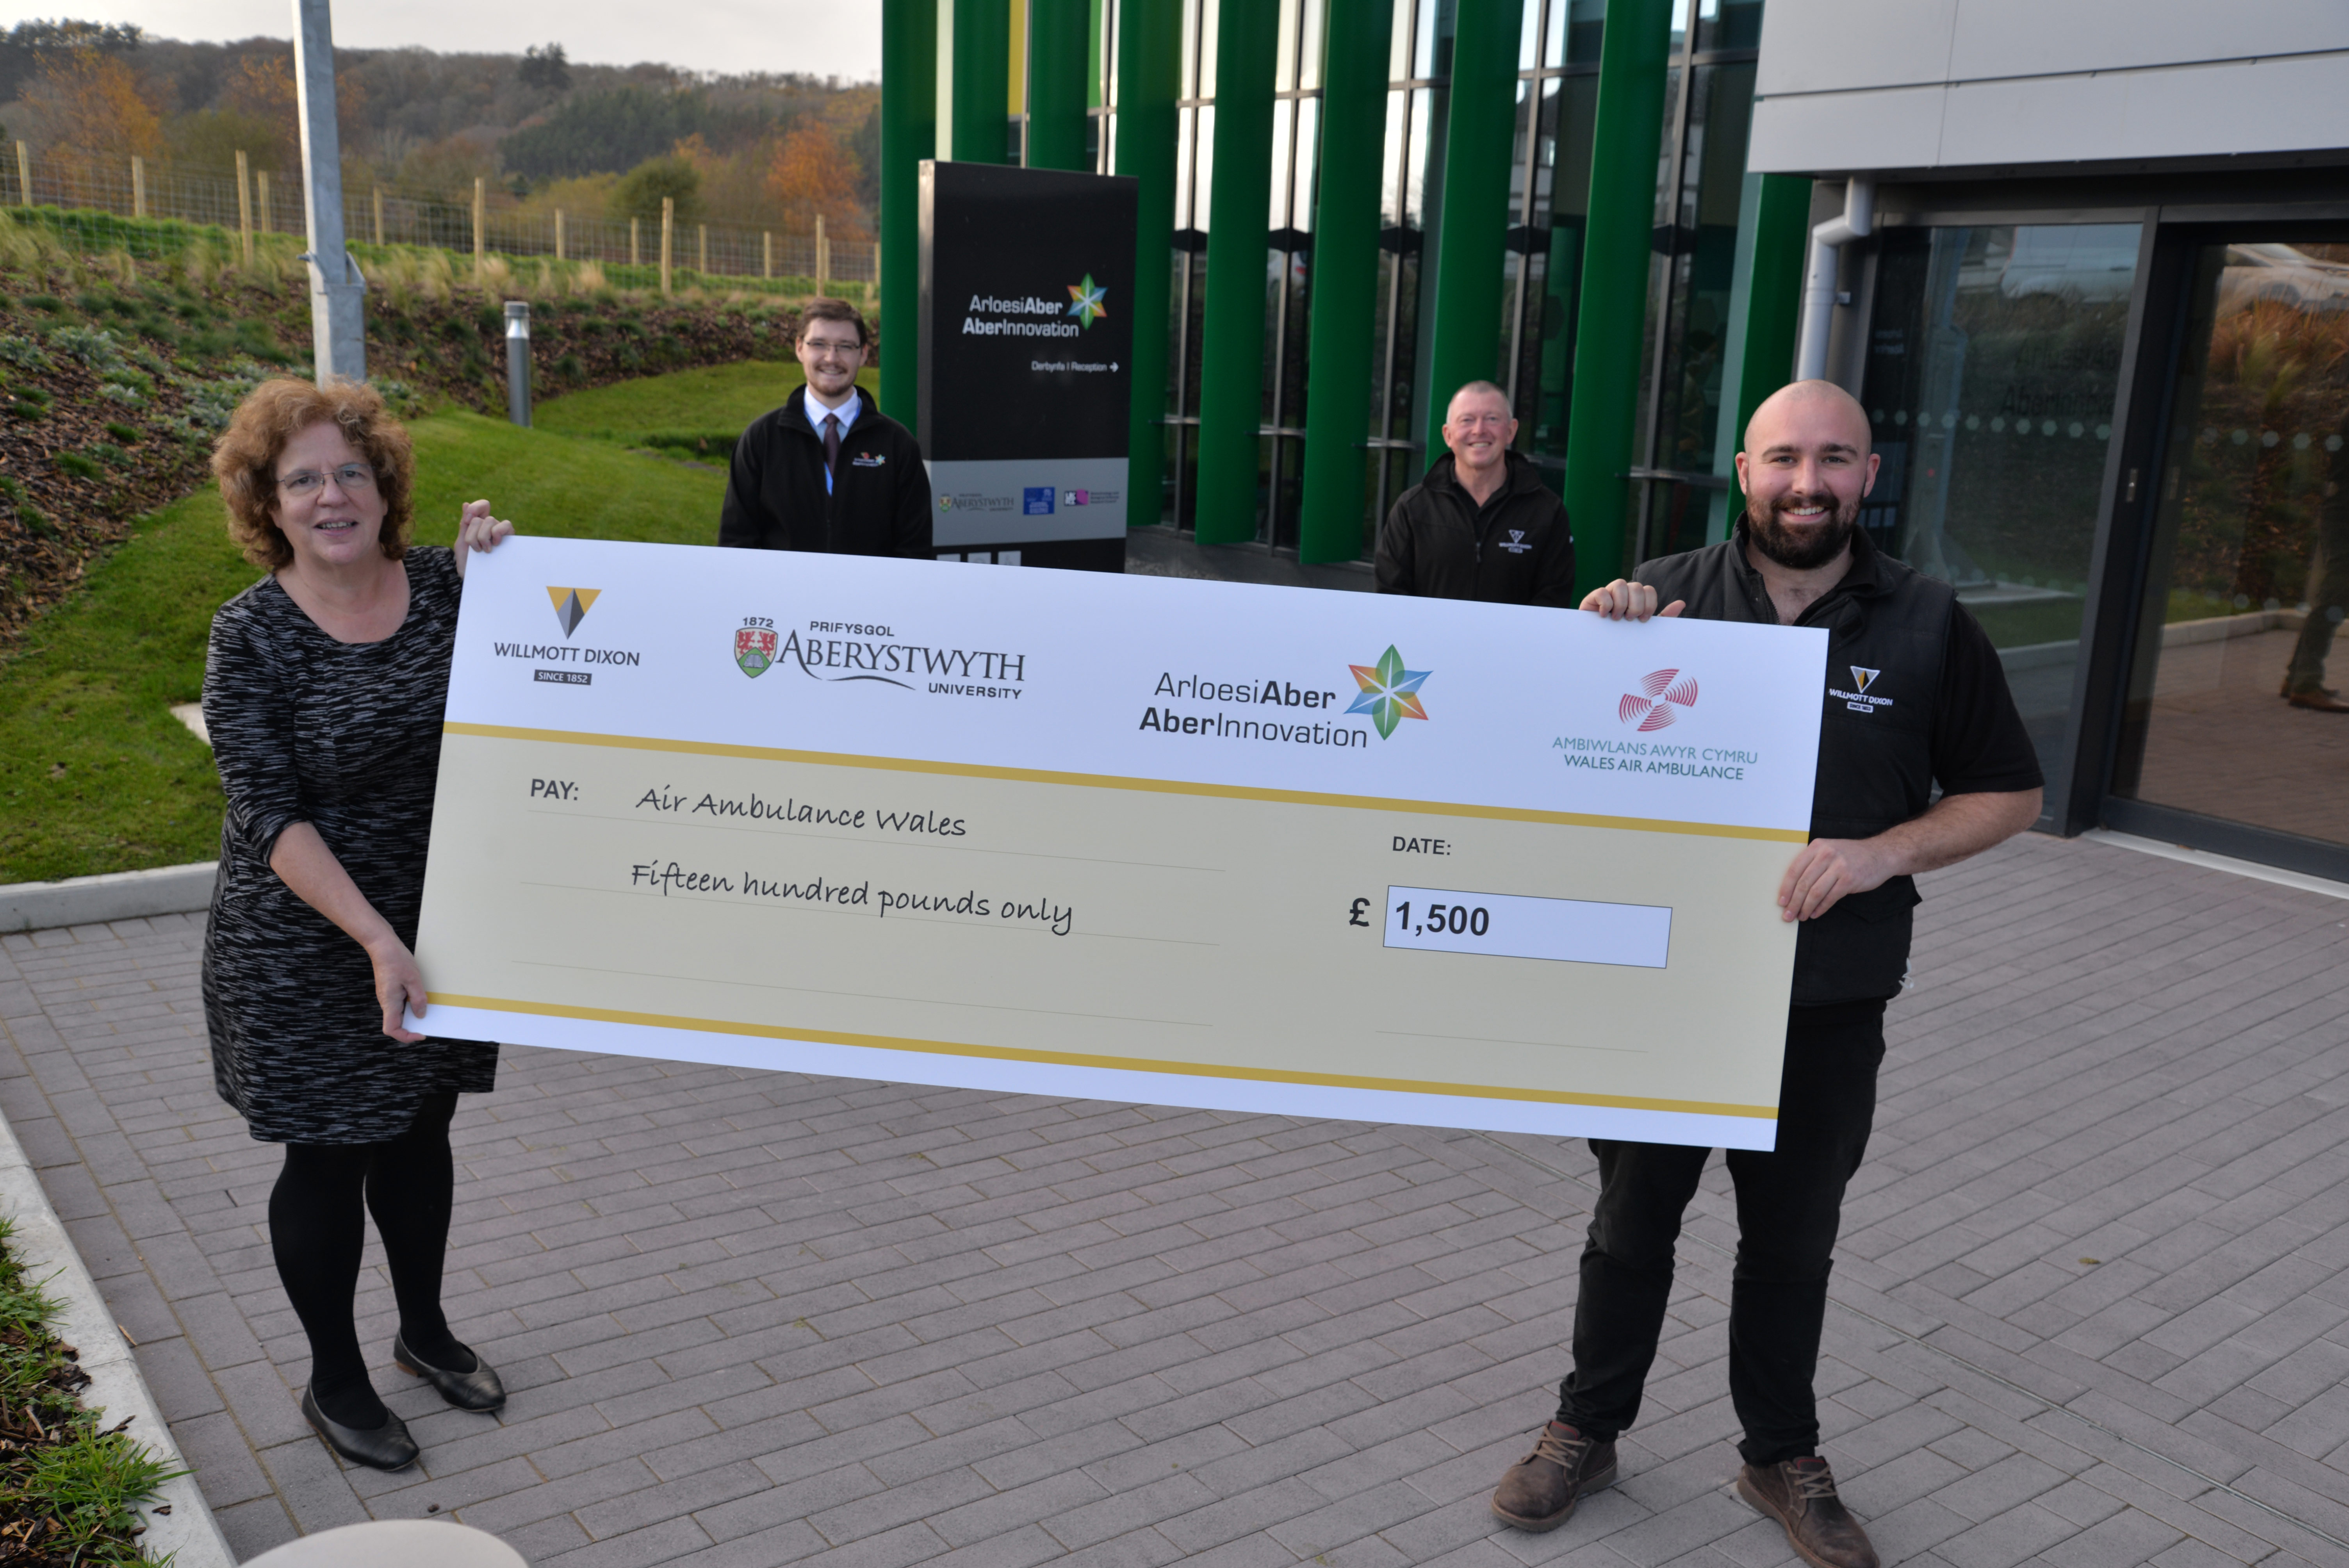 Professor Elizabeth Treasure, Vice-Chancellor of Aberystwyth University receiving a cheque for £1,500 for Wales Air Ambulance from Andrew Jones (Assistant Build Manager), Phil Williams (Assistant Build Manager) and Shaun Davies (Operations Assistant) from Willmott Dixon